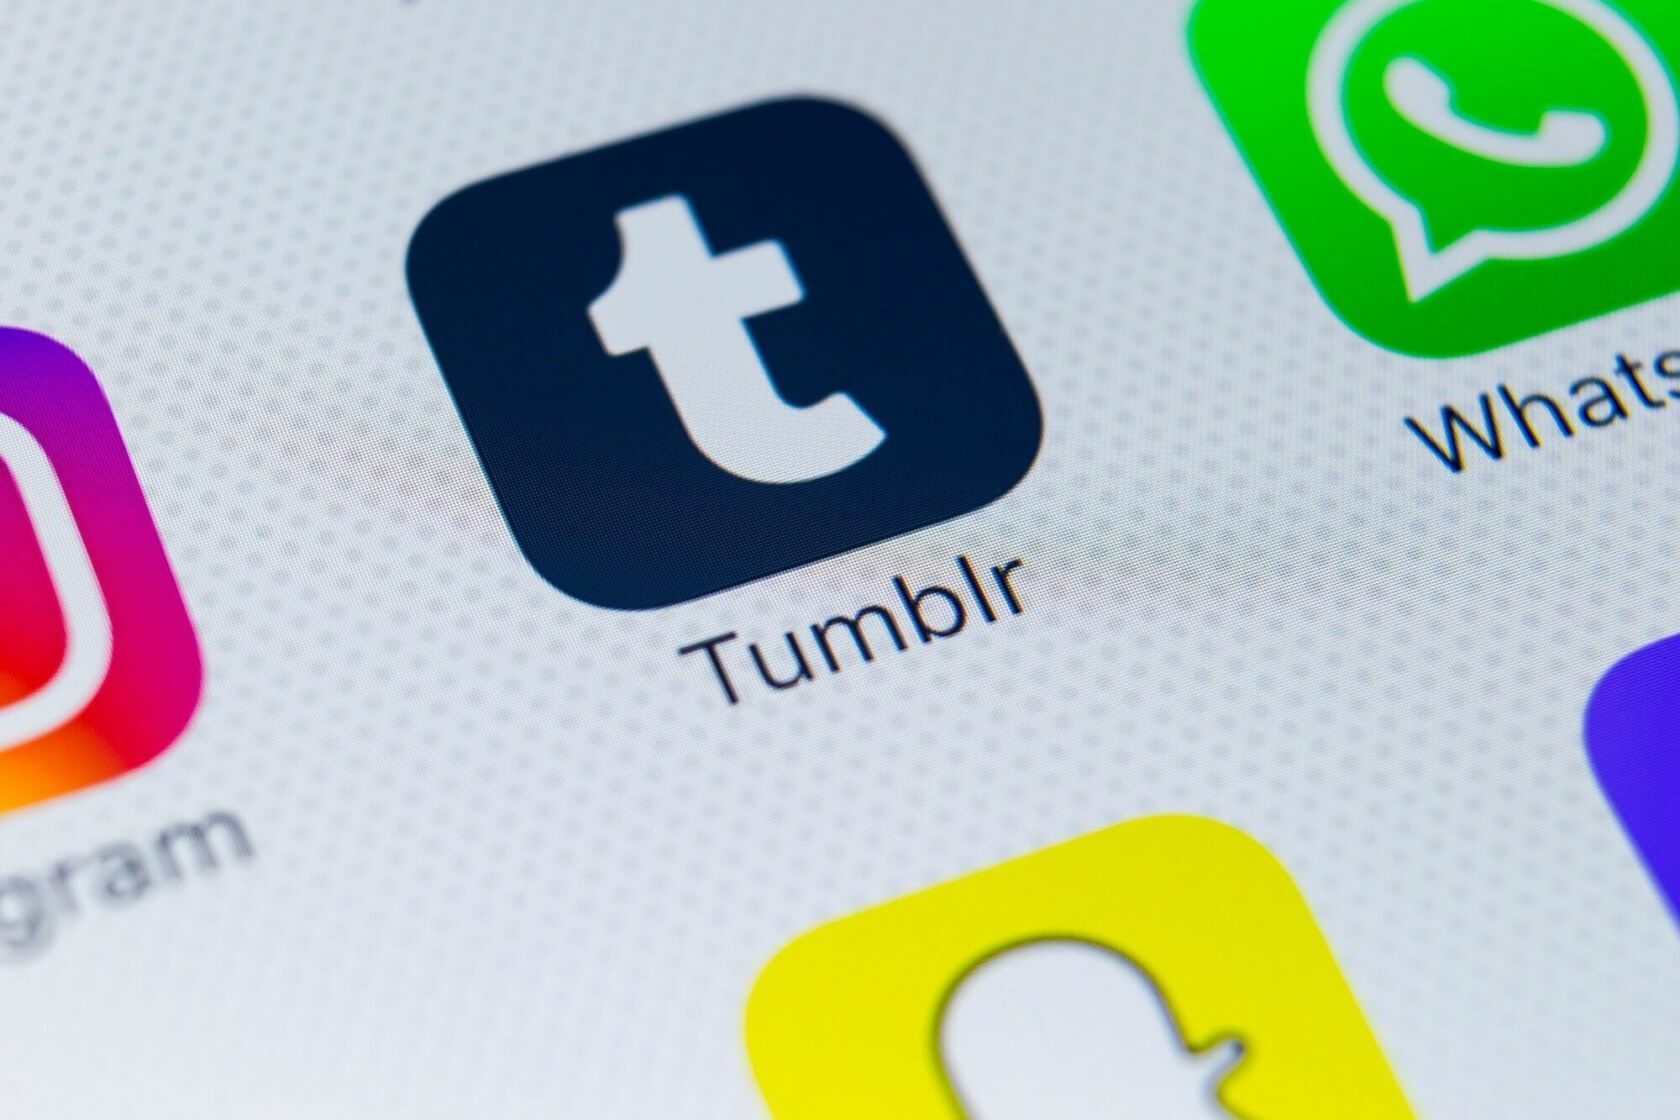 Tumblr is giving pornographic content the boot this month